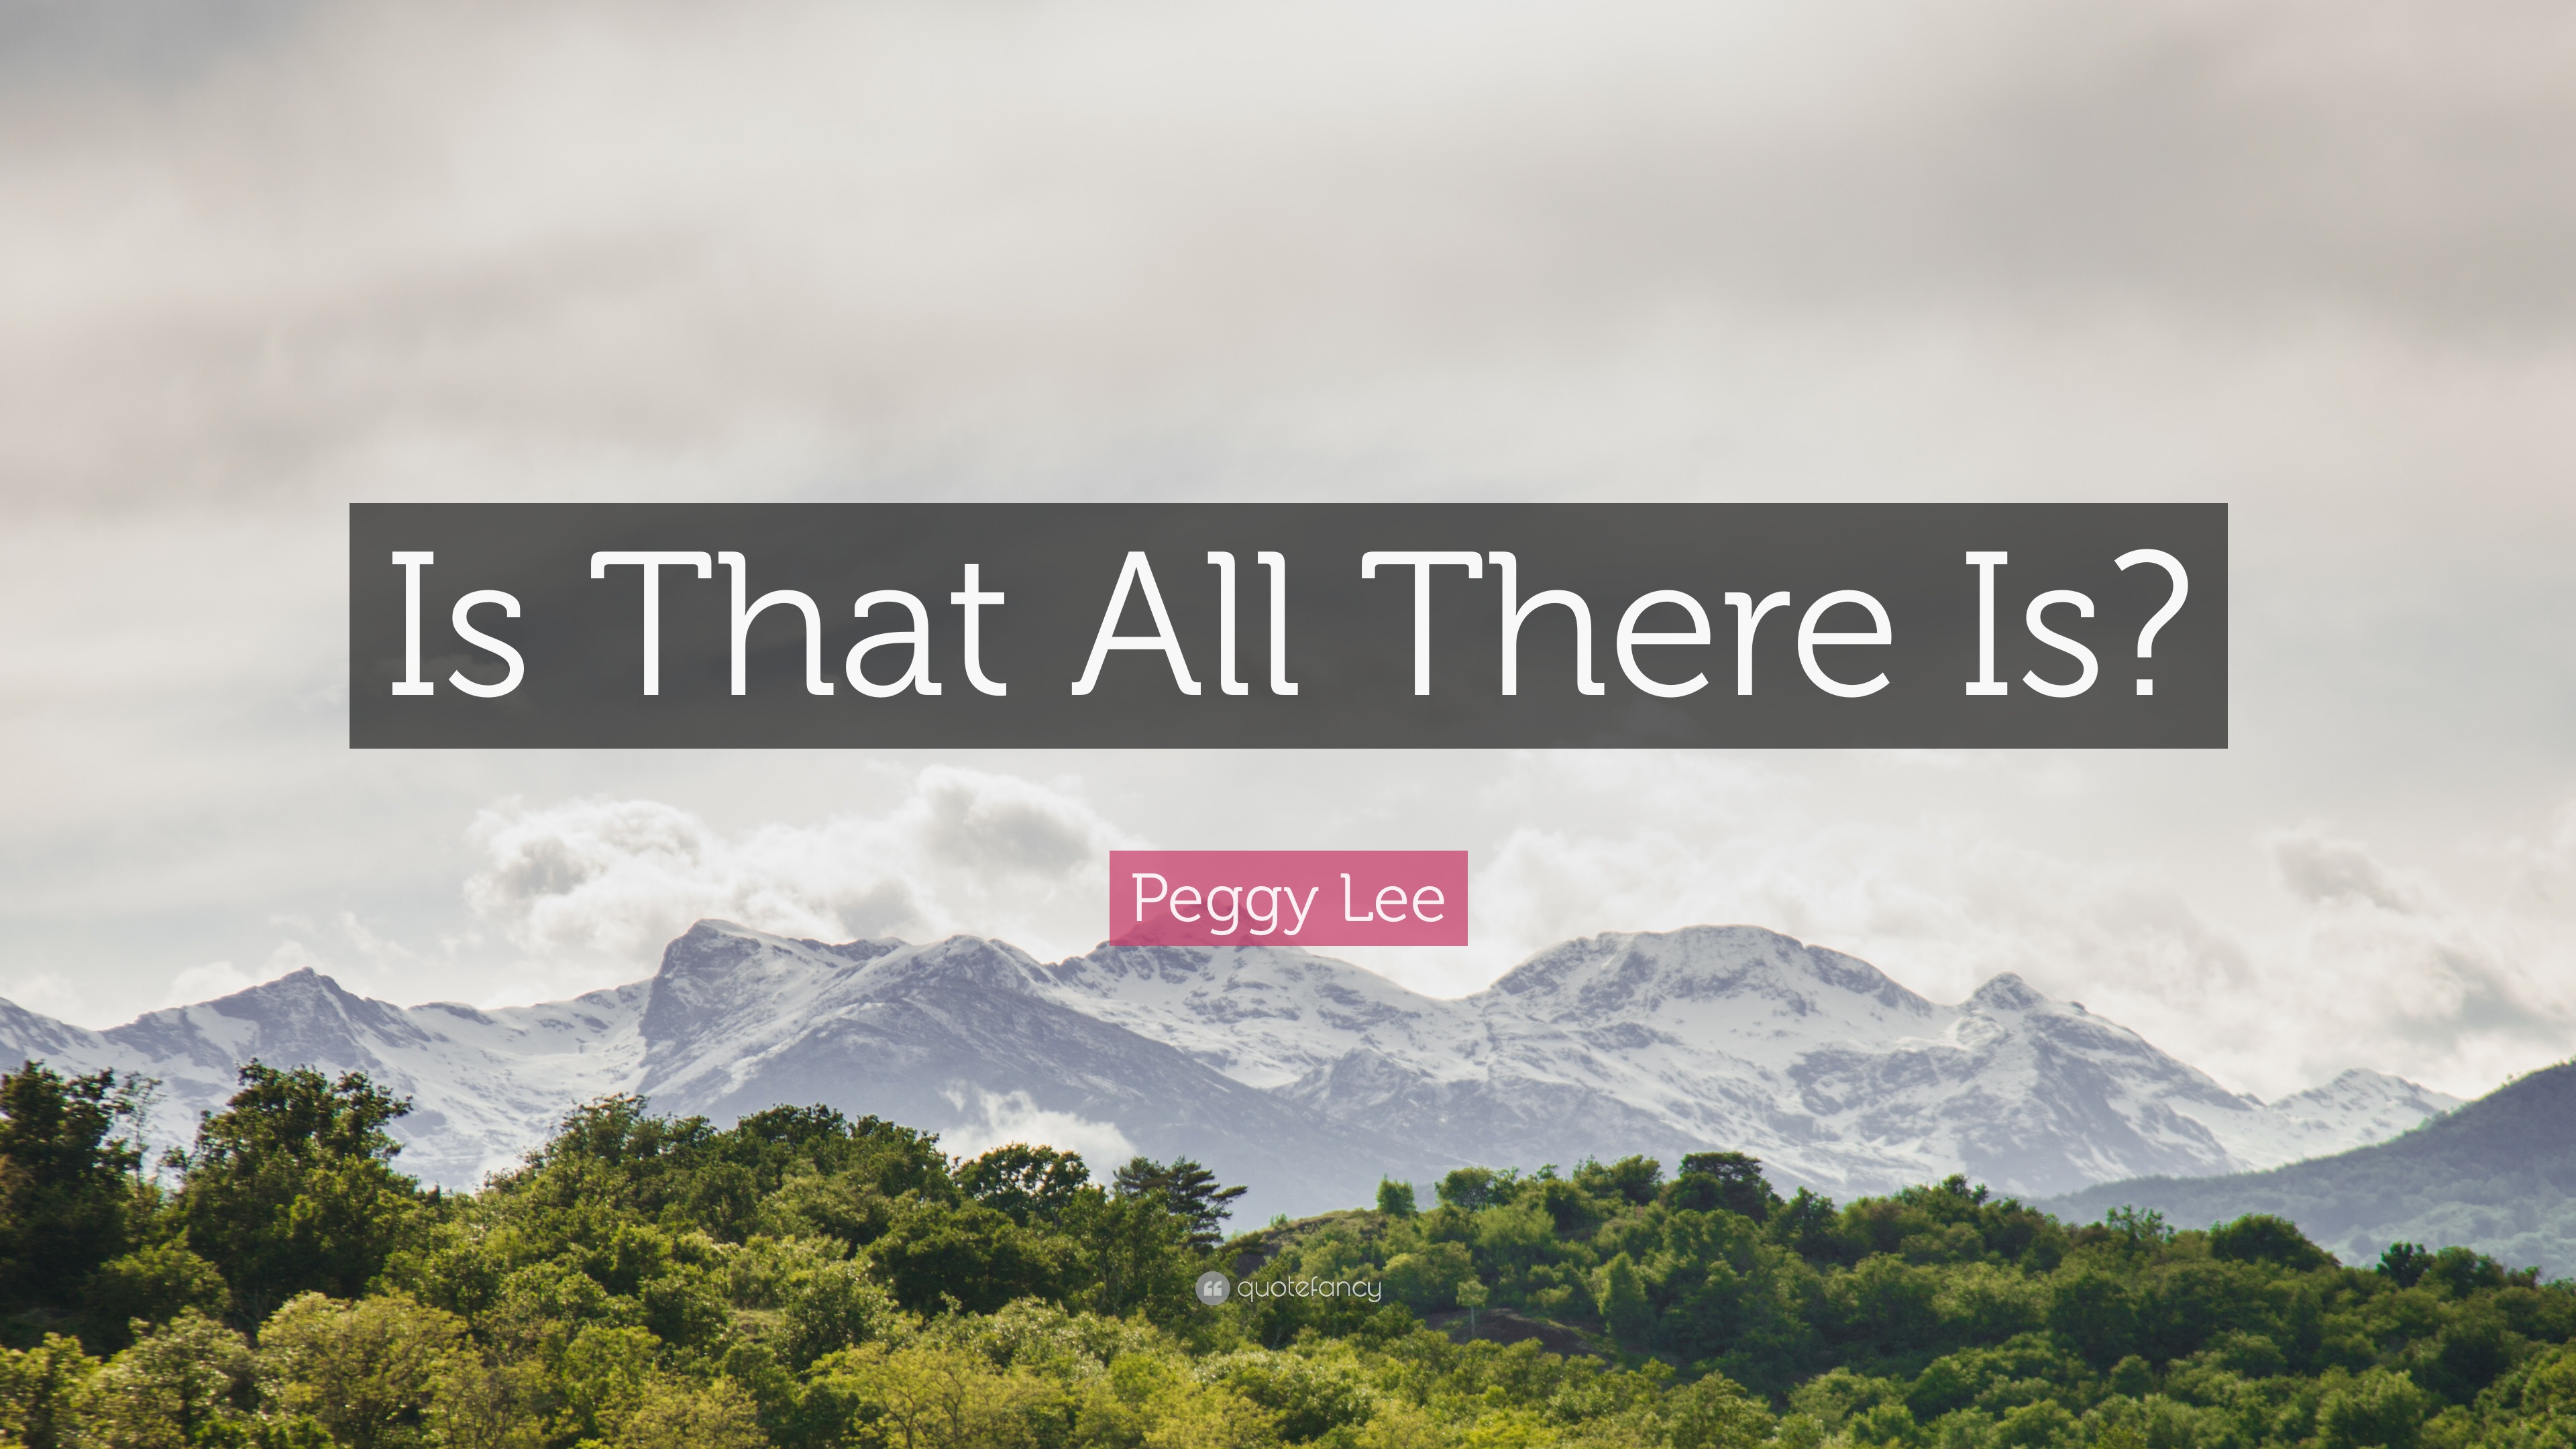 Peggy Lee Quote: “Is That All There Is?”